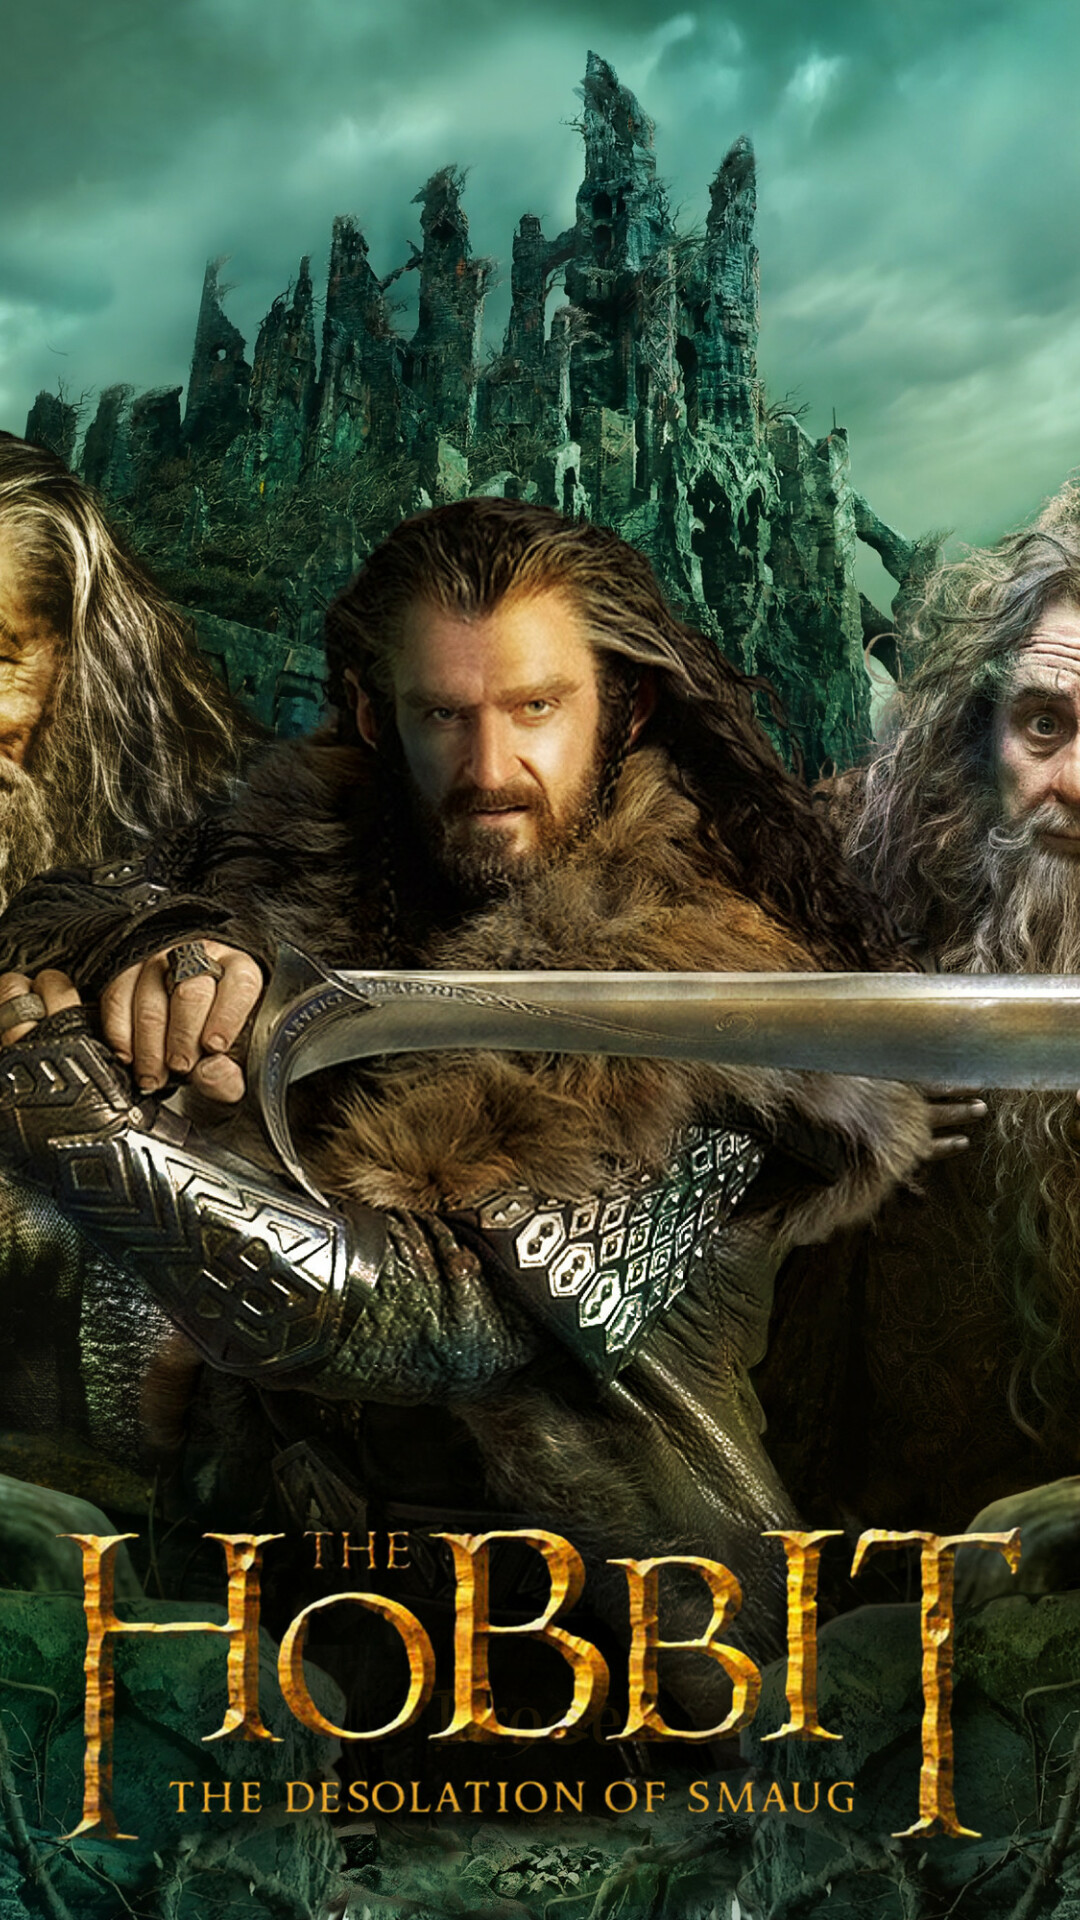 The Hobbit: The Desolation of Smaug, A 2013 epic high fantasy adventure film. 1080x1920 Full HD Wallpaper.